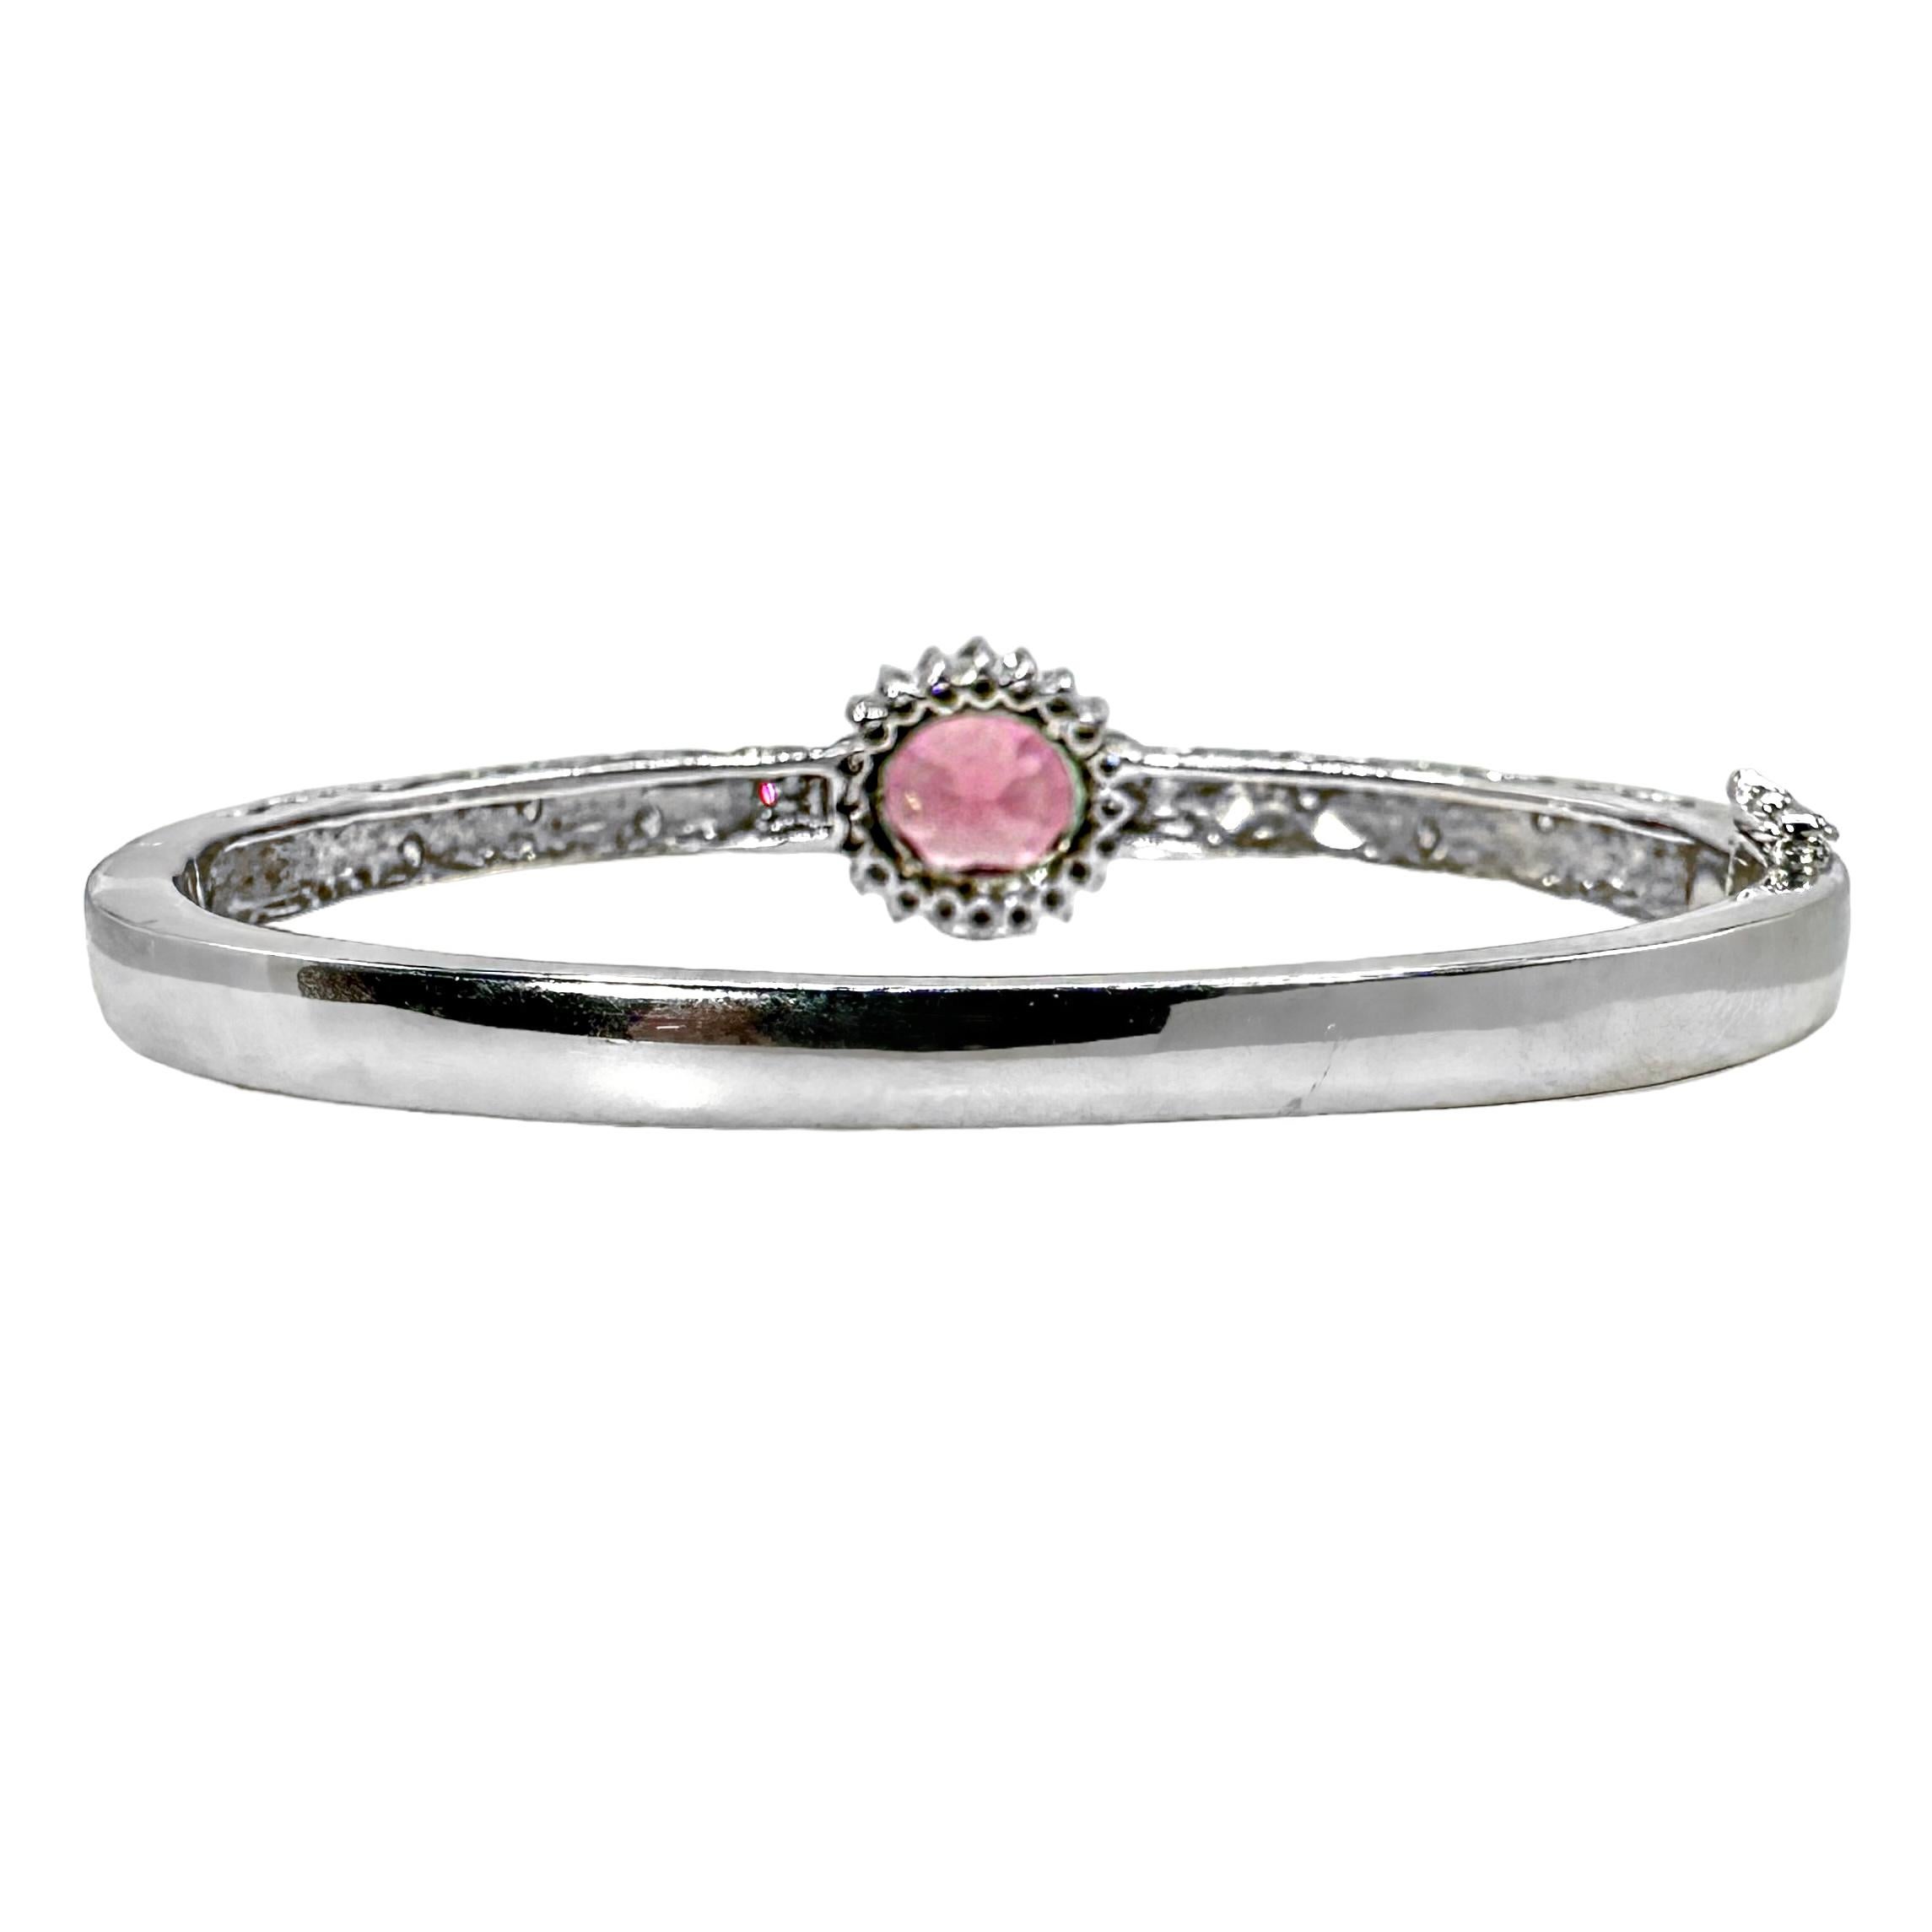 White Gold Bangle Bracelet with 4.27ct Oval Pink Tourmaline and Diamond Halo In Good Condition For Sale In Palm Beach, FL